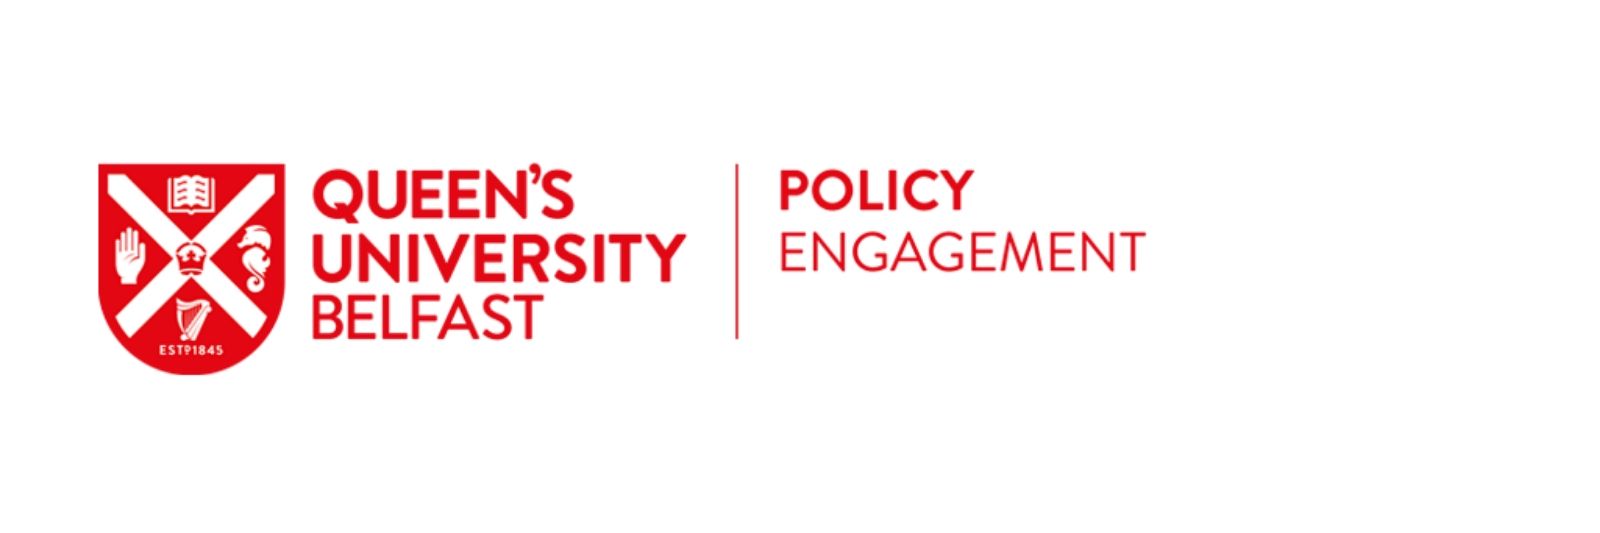 Policy engagement logo